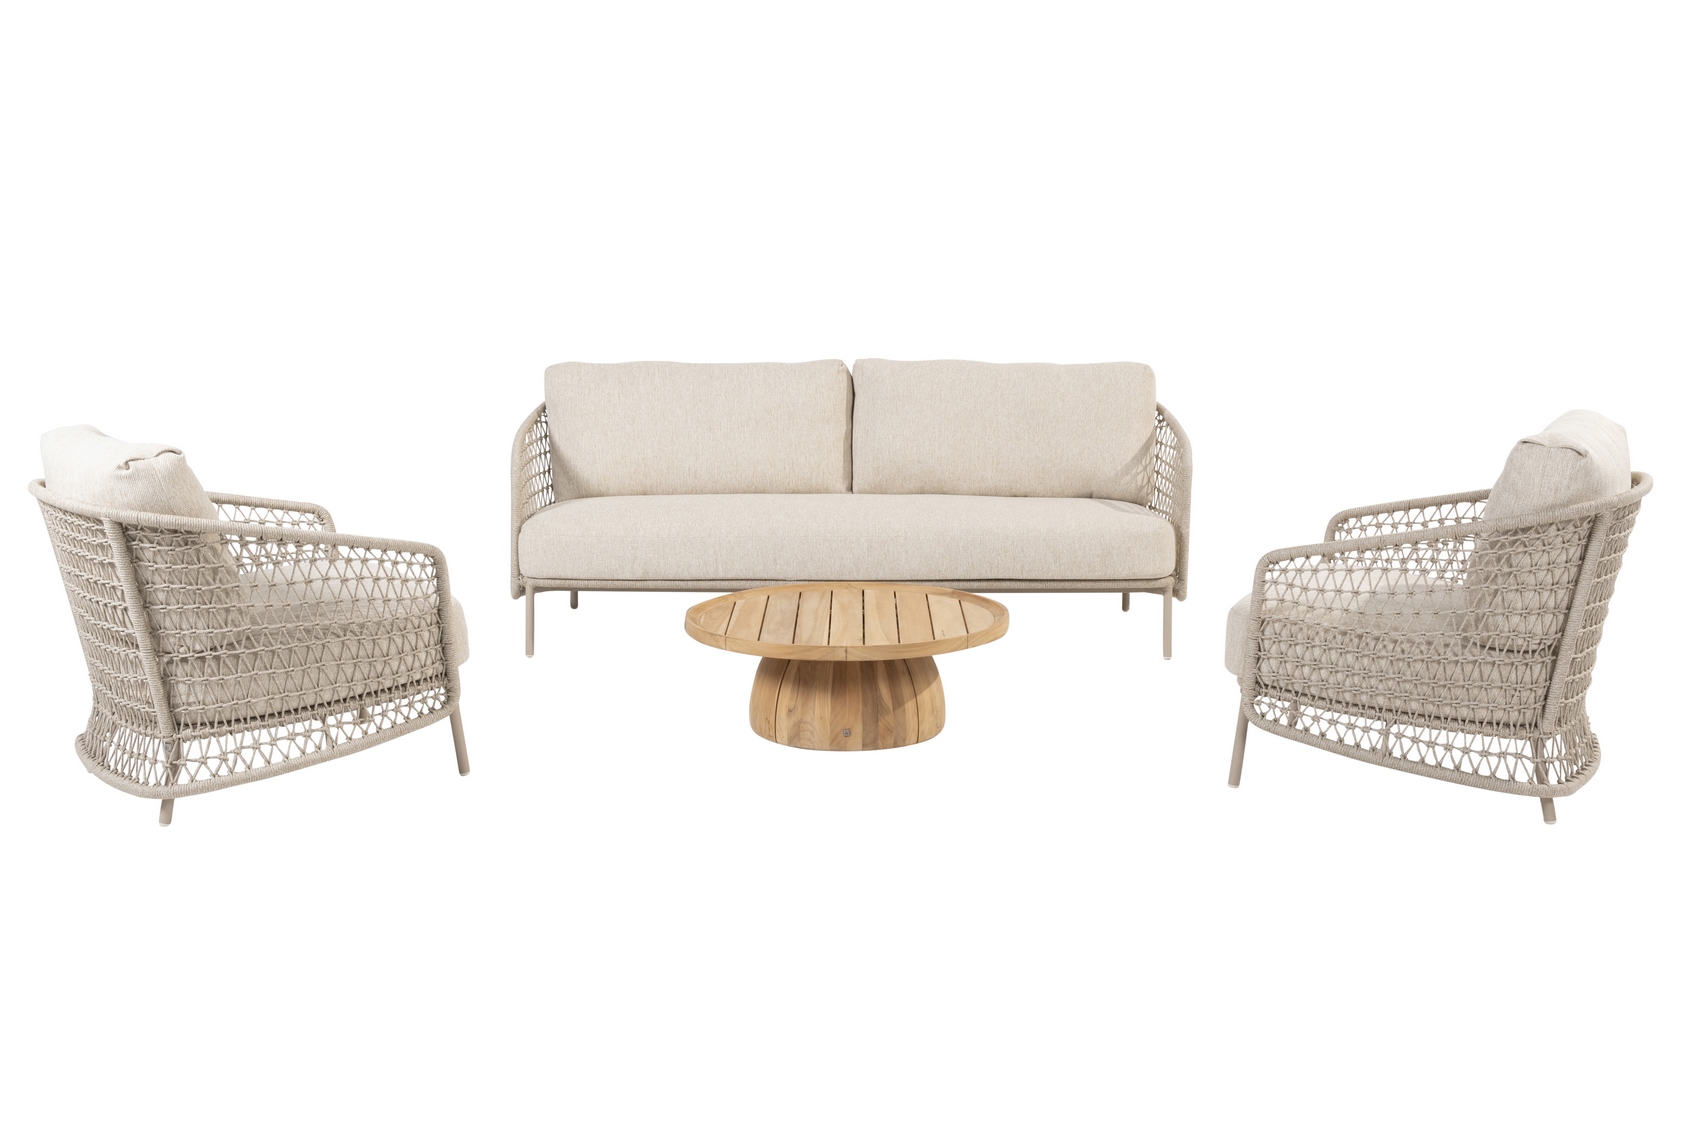 213936-213937-213961__Puccini_living_set_Latte_with_Pablo_80cm_table_01.jpg